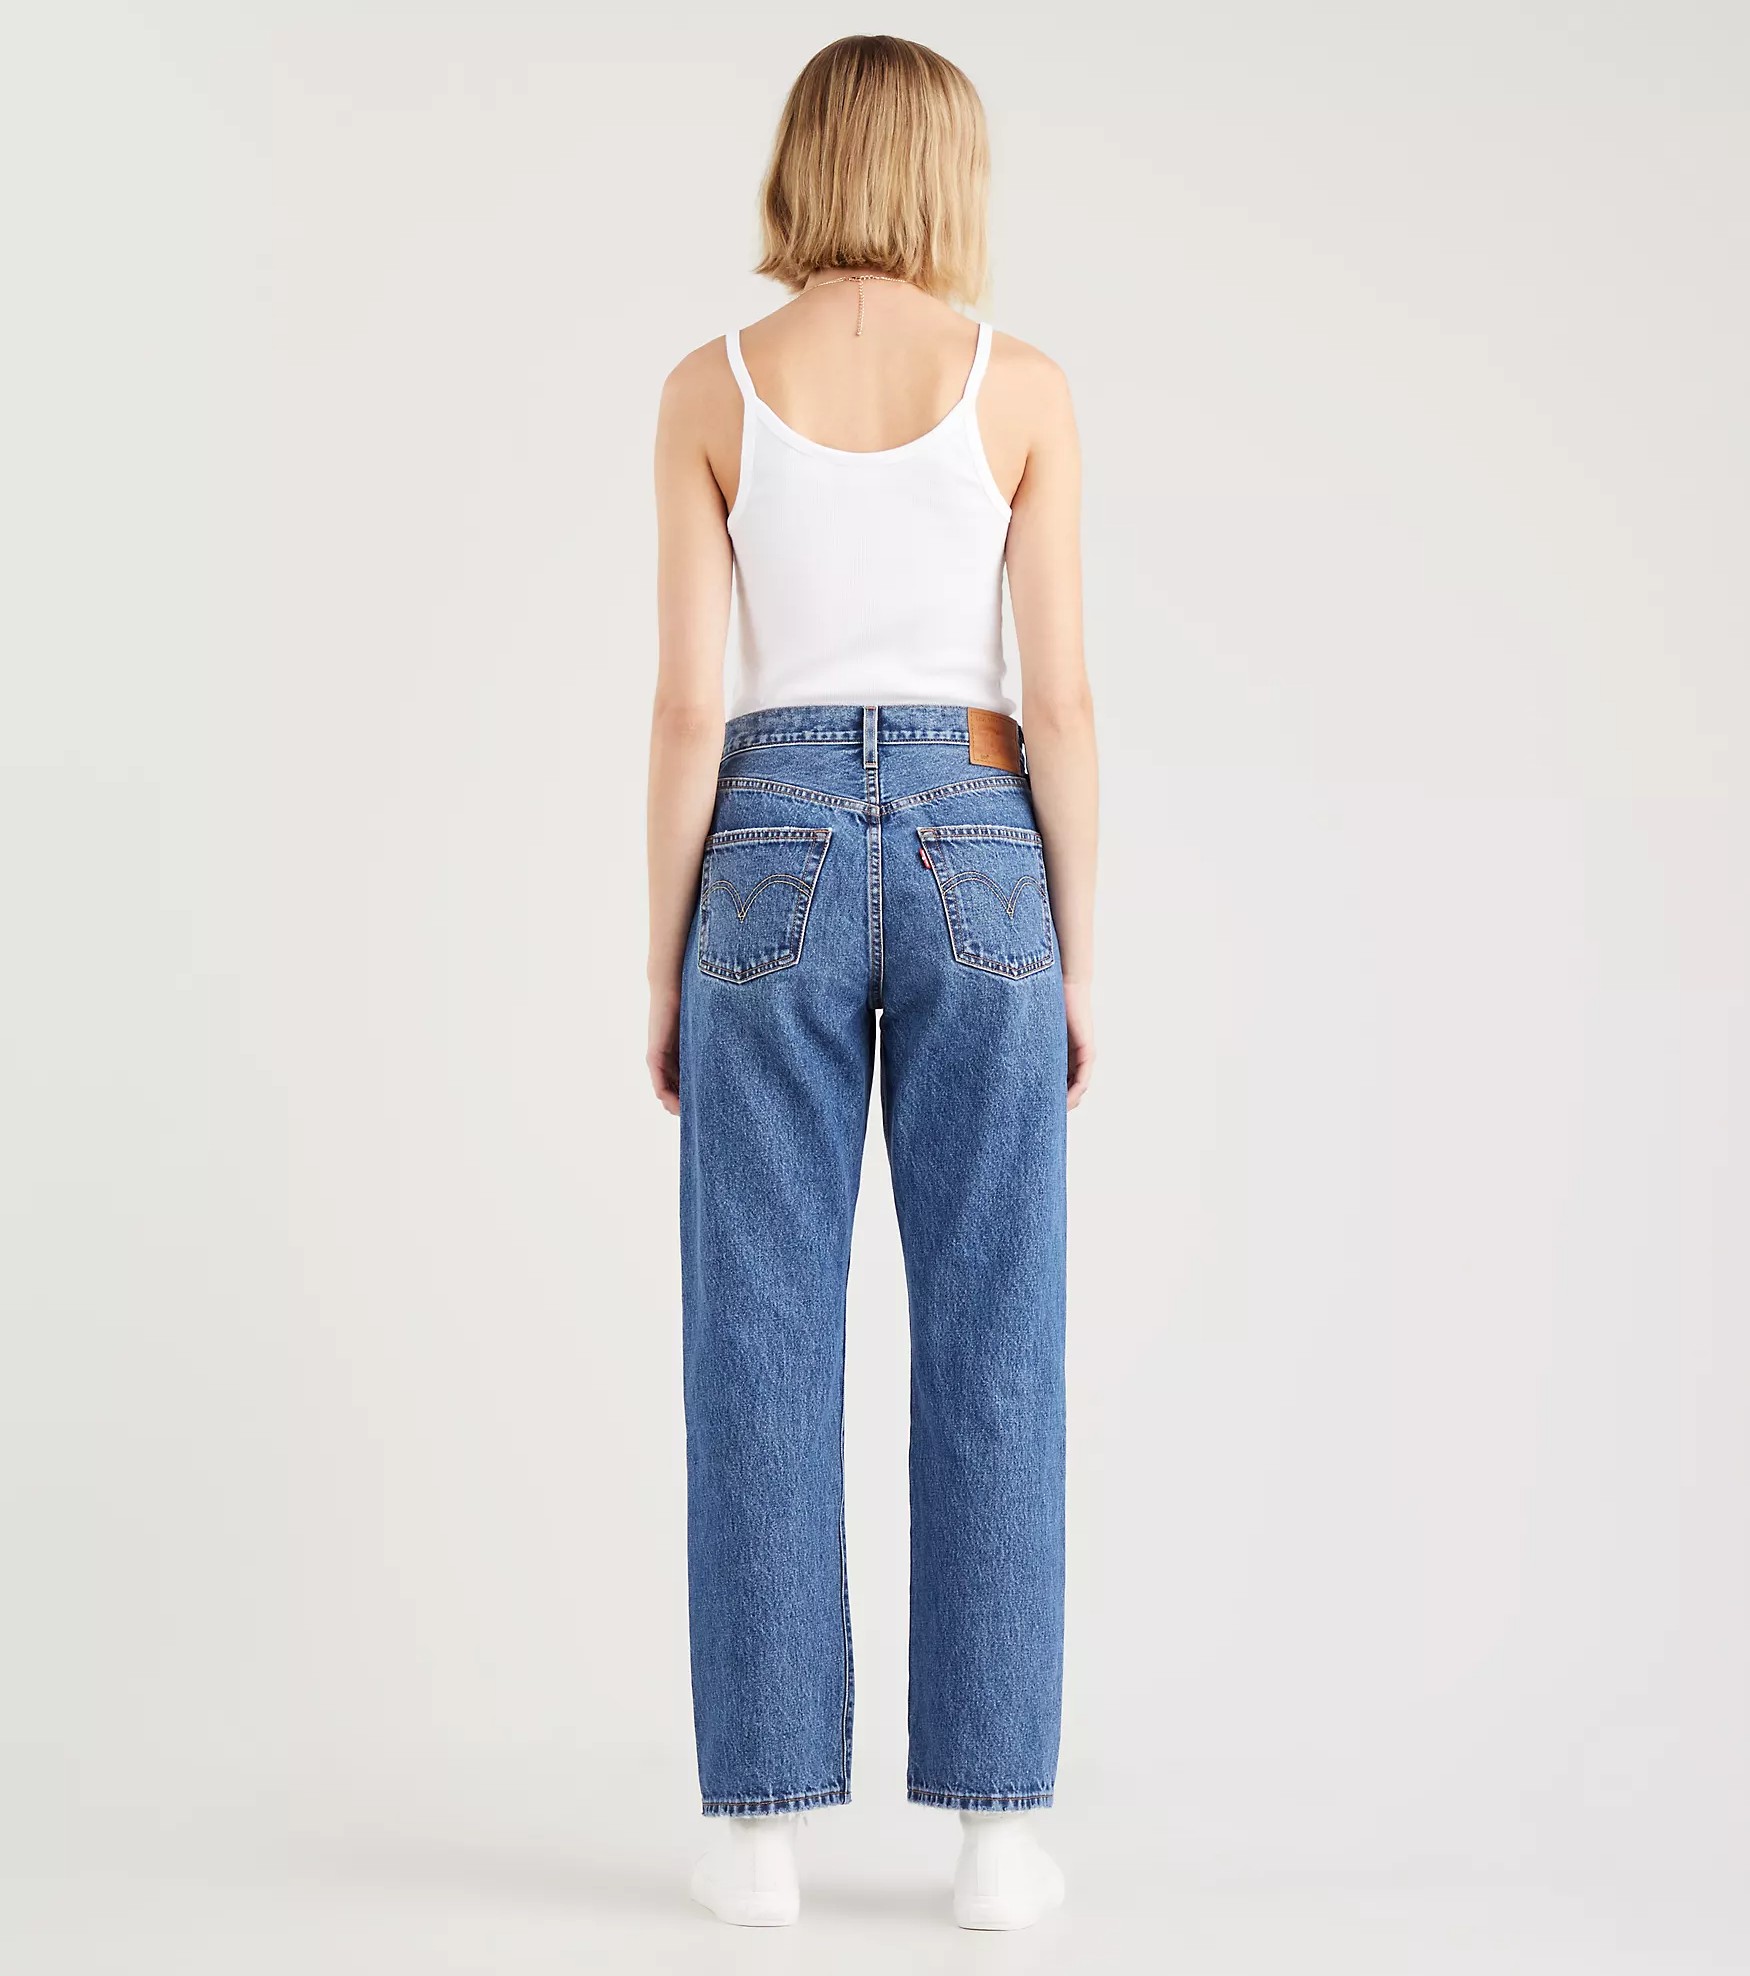 Levi's 501 90’S JEANS - Mad Love Blue - Hores Stores